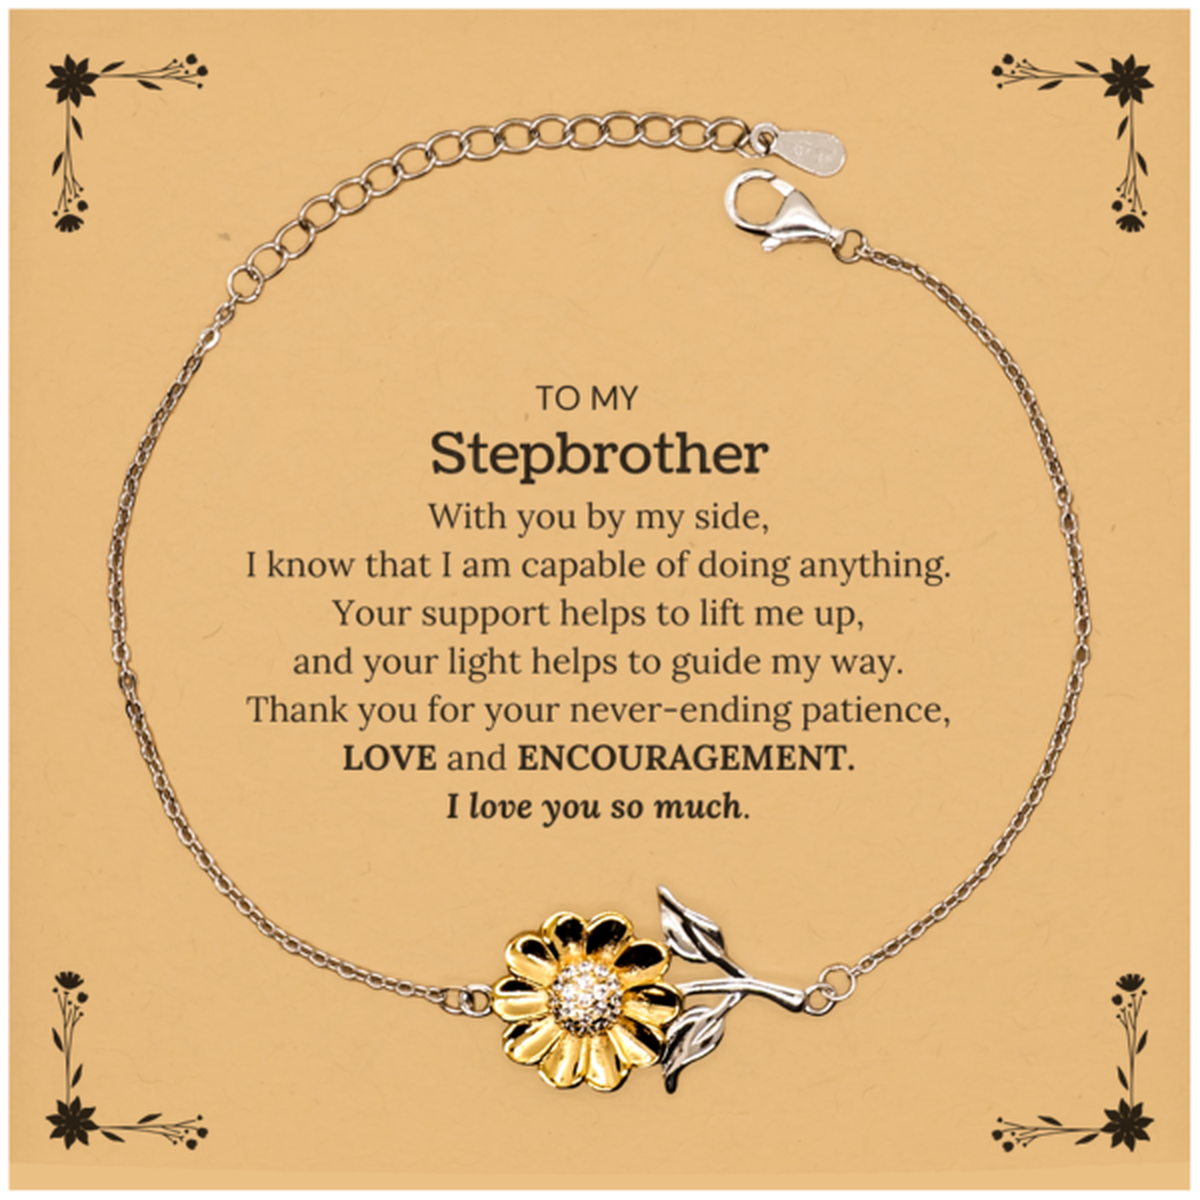 Appreciation Stepbrother Sunflower Bracelet Gifts, To My Stepbrother Birthday Christmas Wedding Keepsake Gifts for Stepbrother With you by my side, I know that I am capable of doing anything. I love you so much